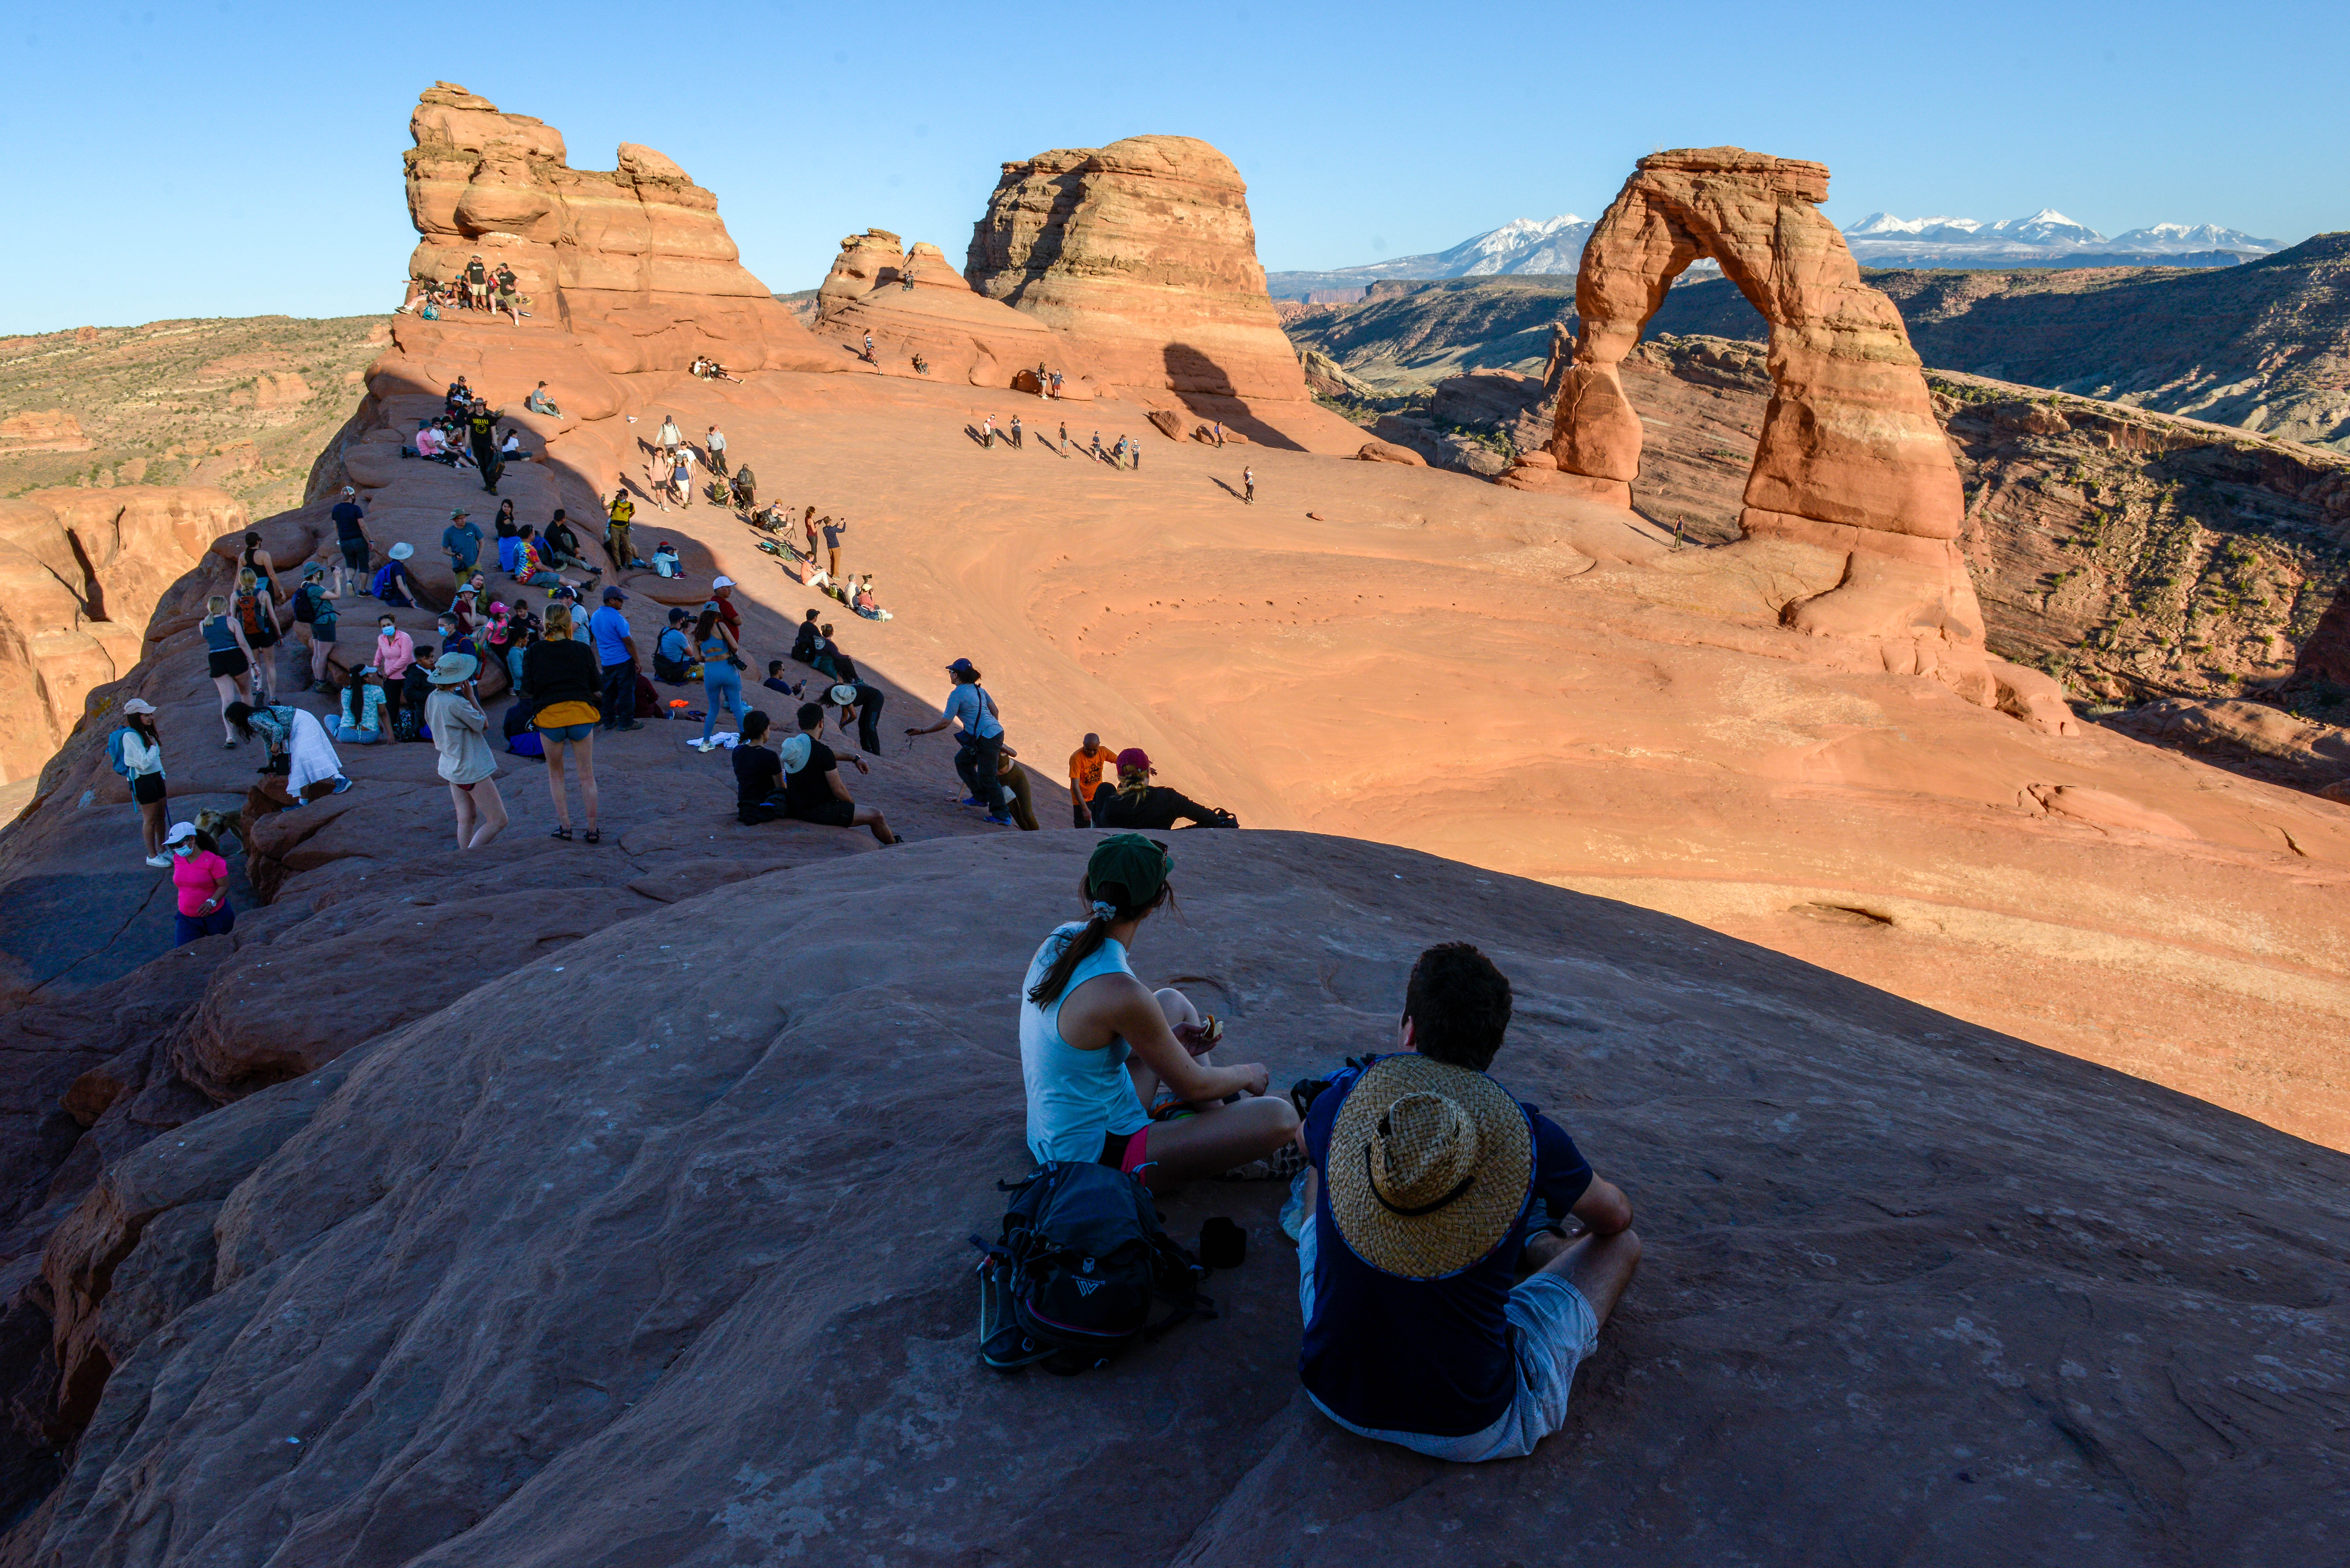 Several dozen visitors sit or stand in front of Delicate Arch, an orange sandstone arch perched on the precipice of a cliff framing mountains in the distance.